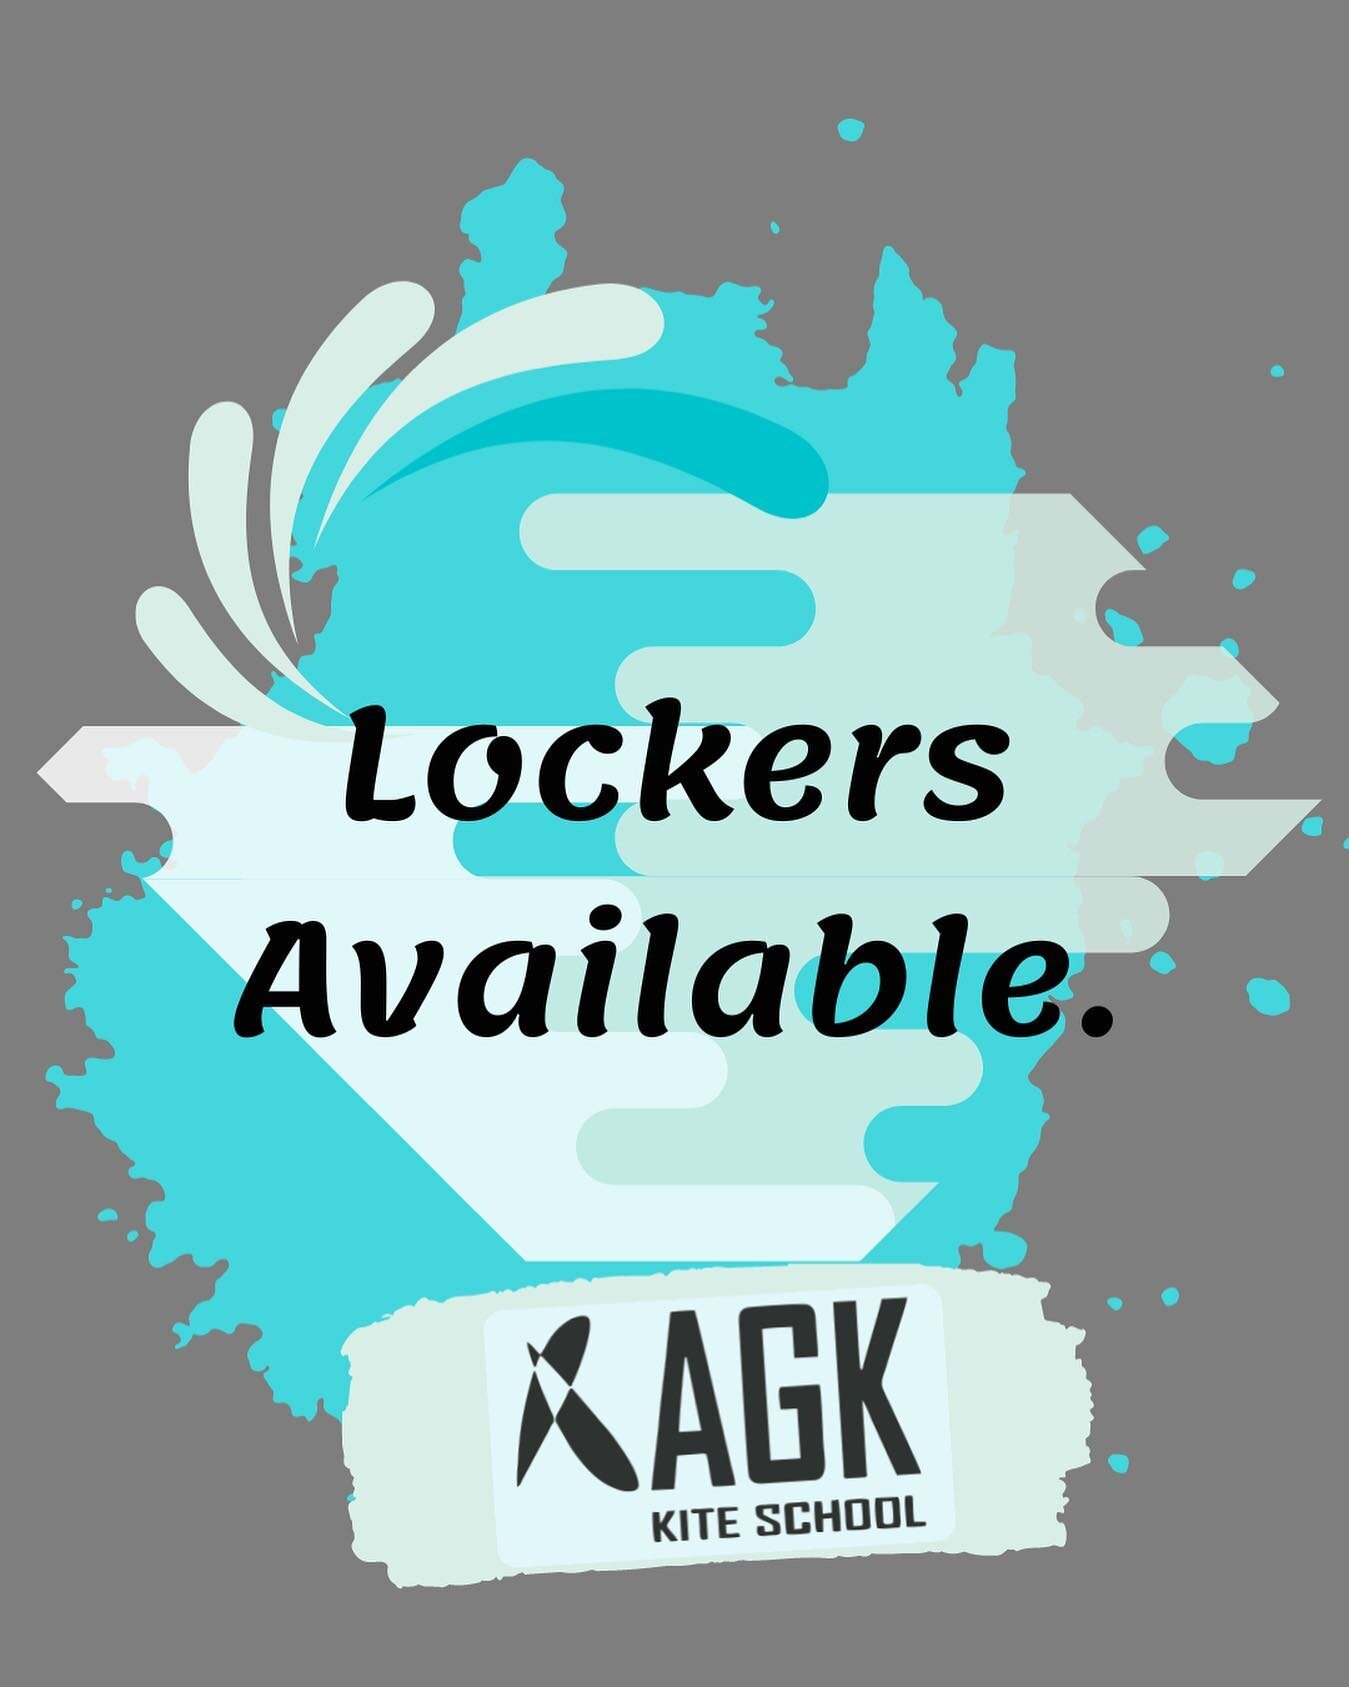 Don't know where to store your kitesurfing equipment? ☀️🌊

We have lockers available, with the option of renting them monthly or weekly.

Nothing better than putting together your equipment and entering the water in the blink of an eye. 🏖

For more